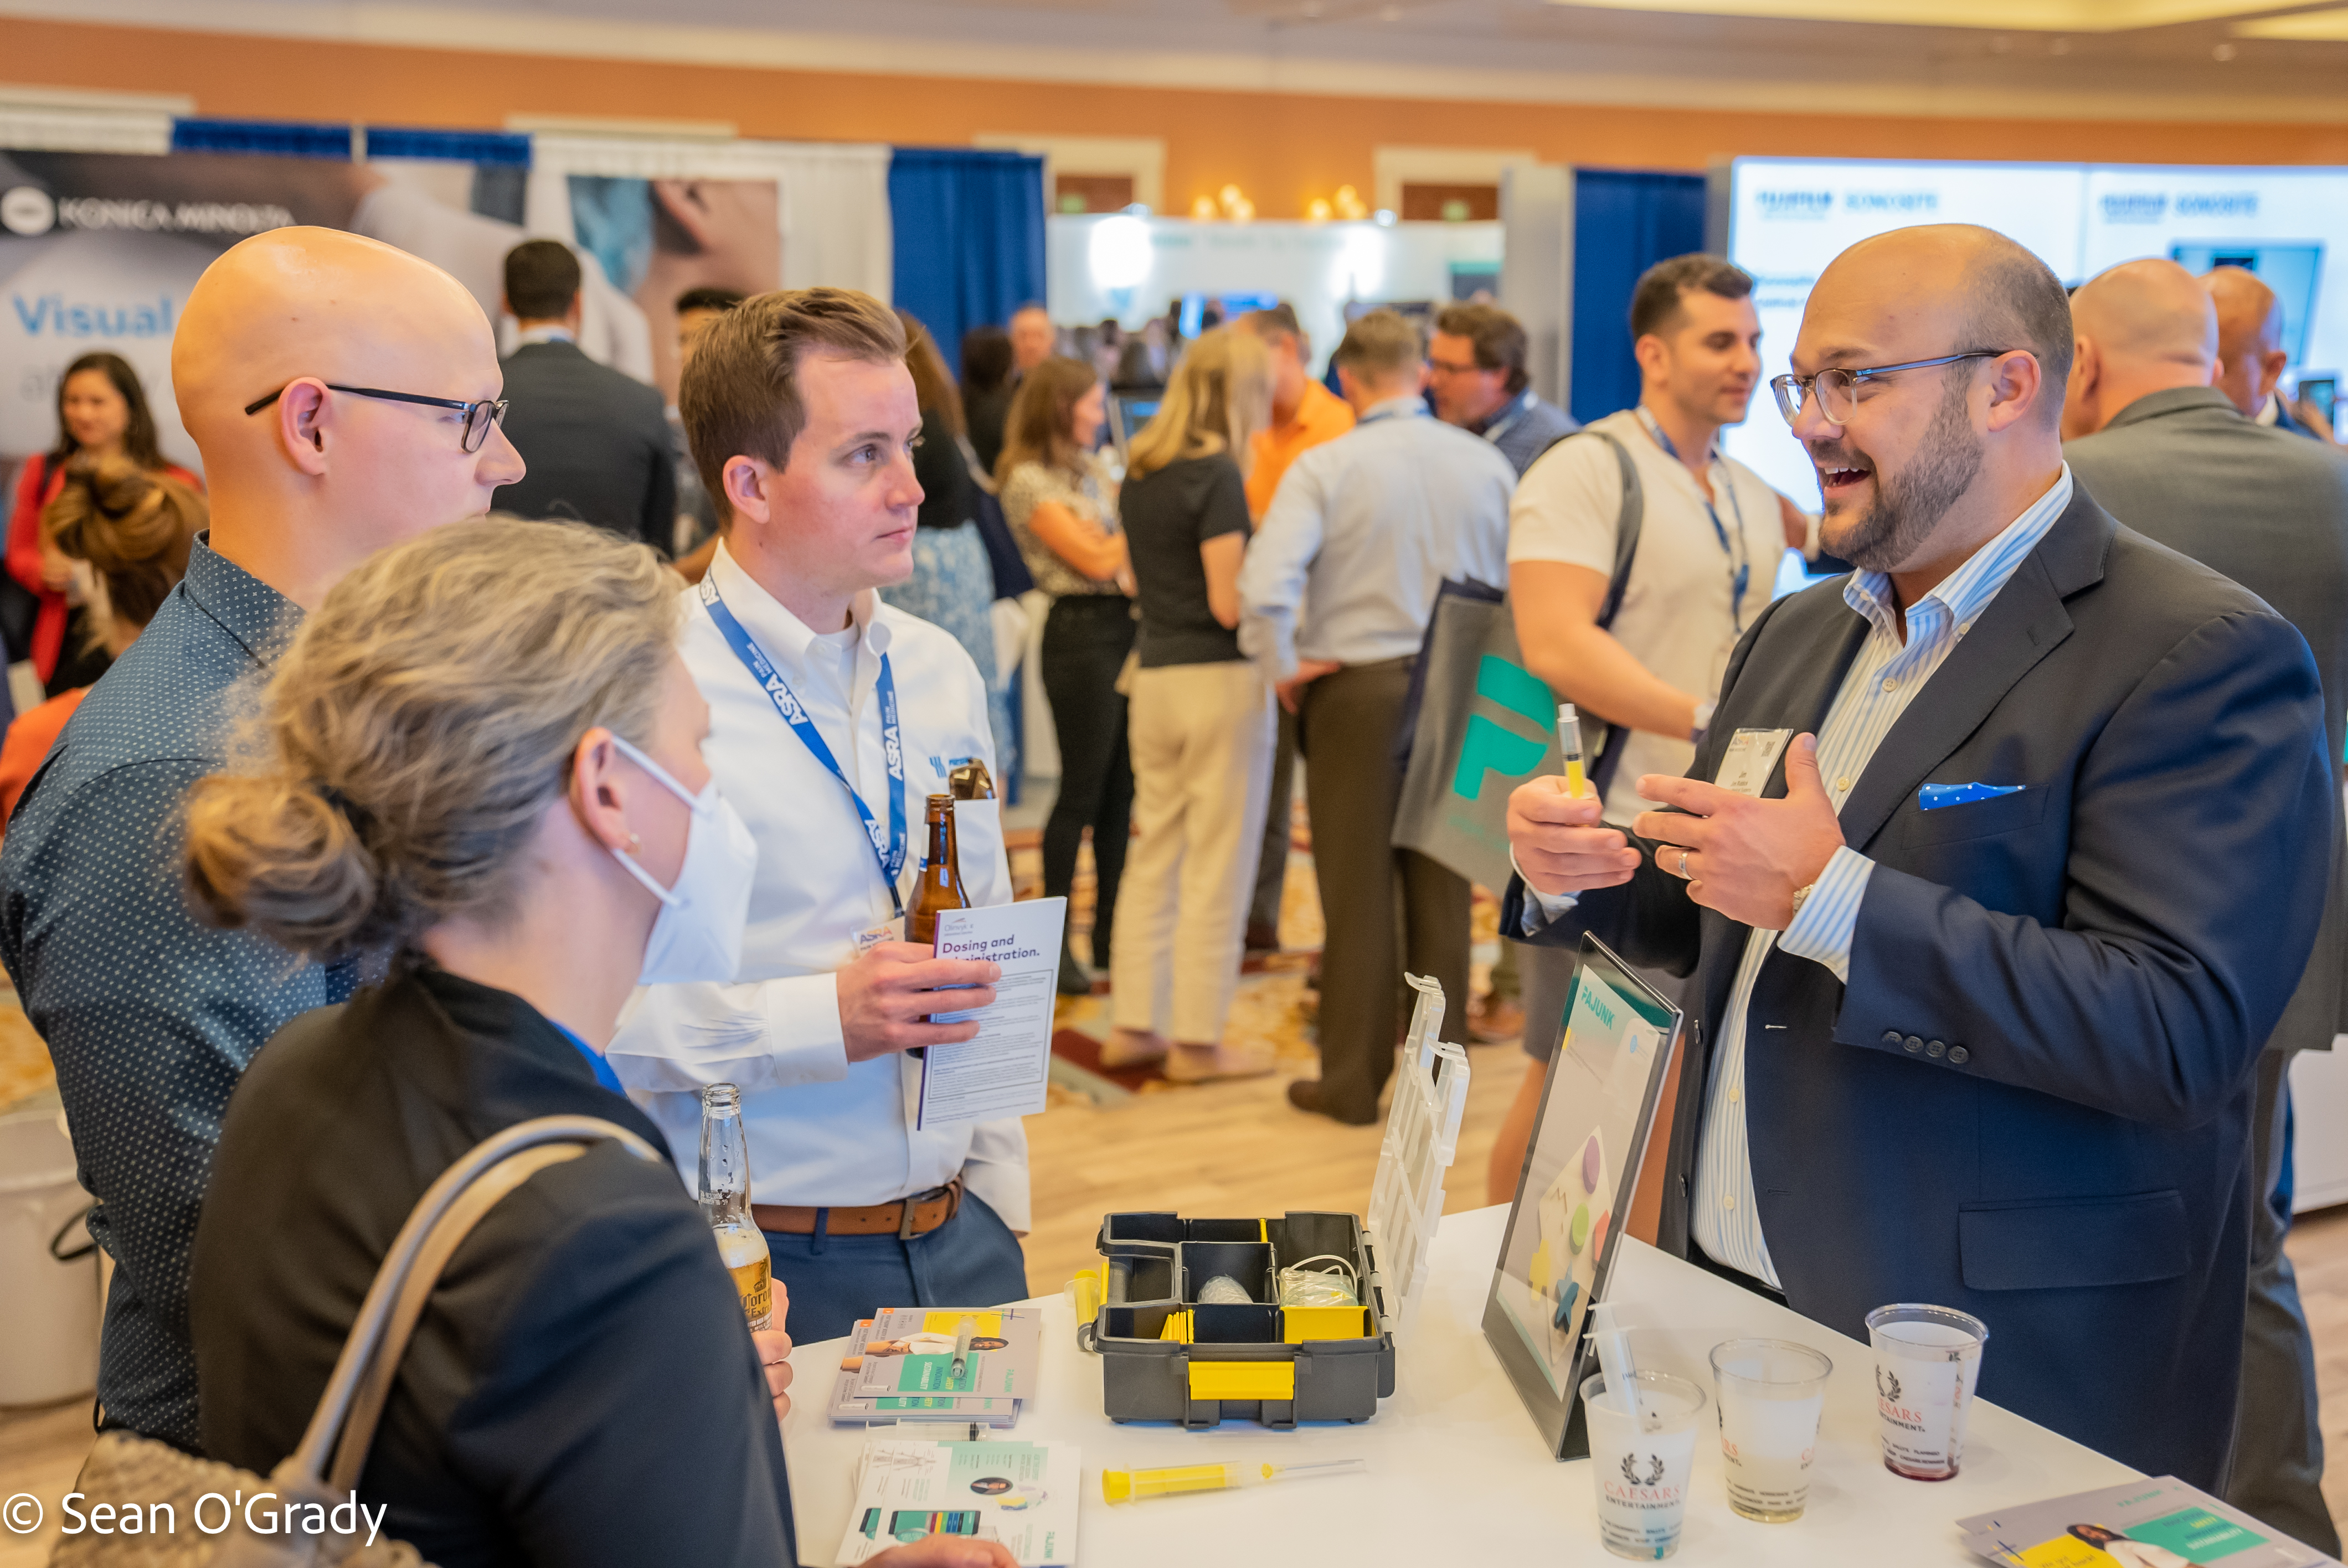 Exhibitor and attendee discuss products